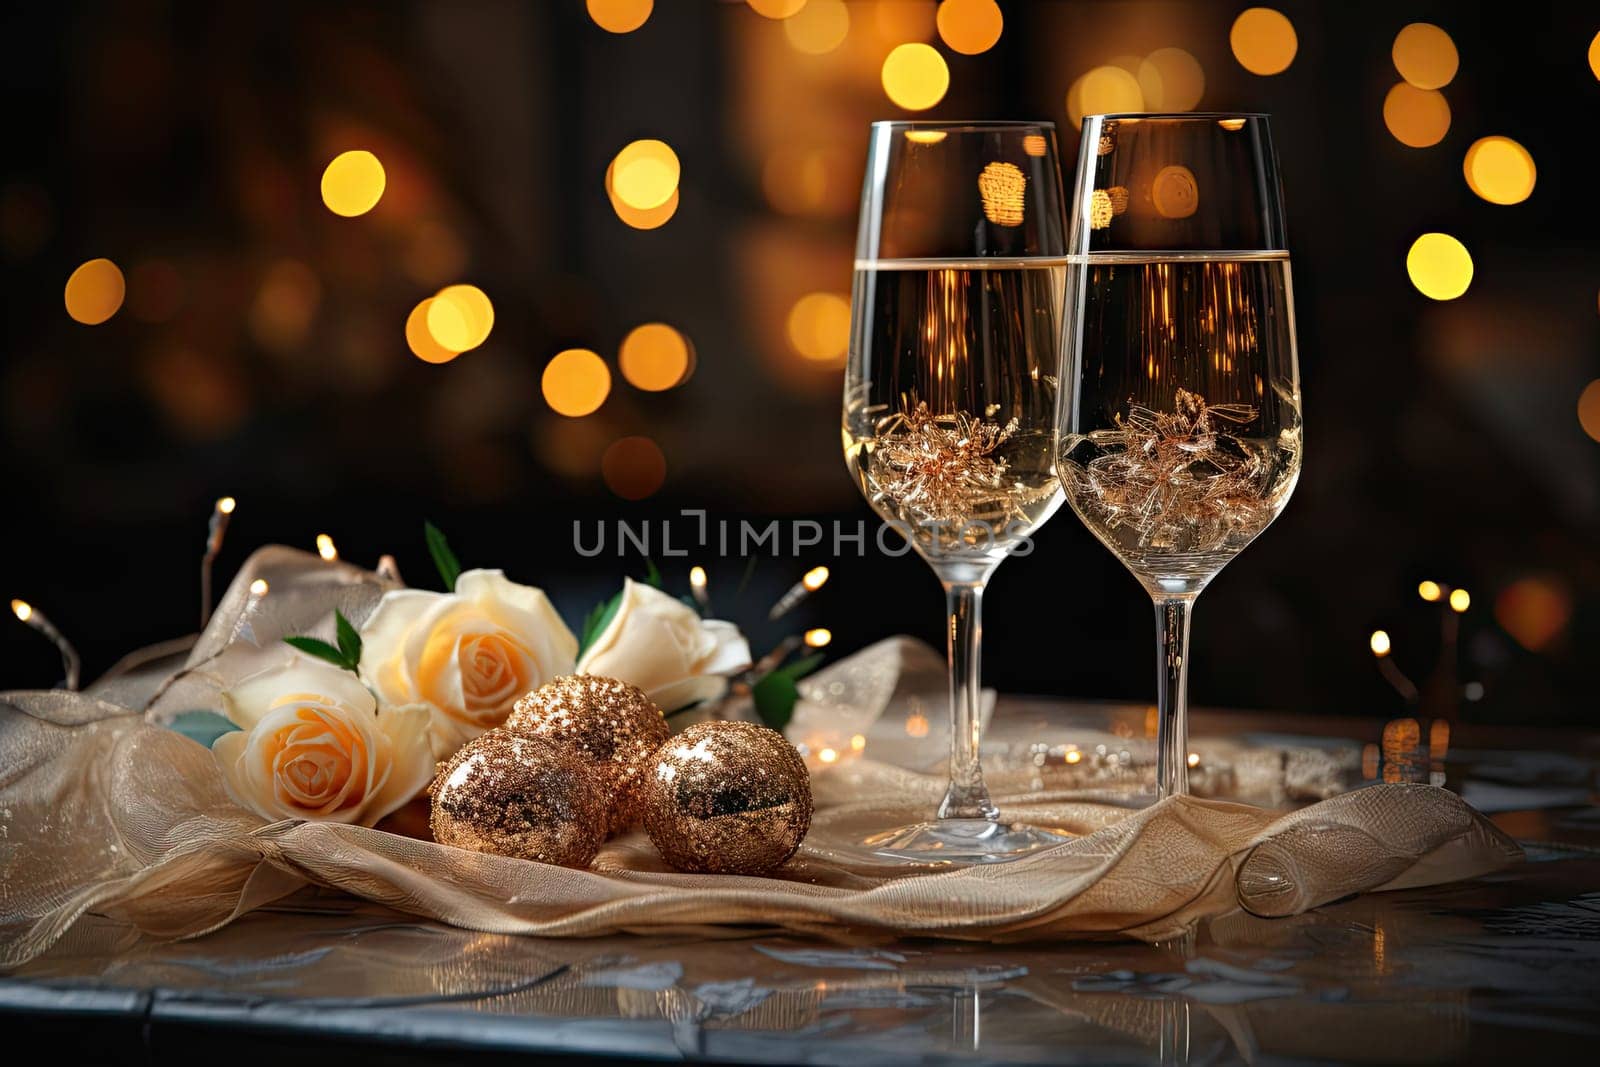 A Toast to Love: Celebrating with Bubbles, Blossoms, and Romance